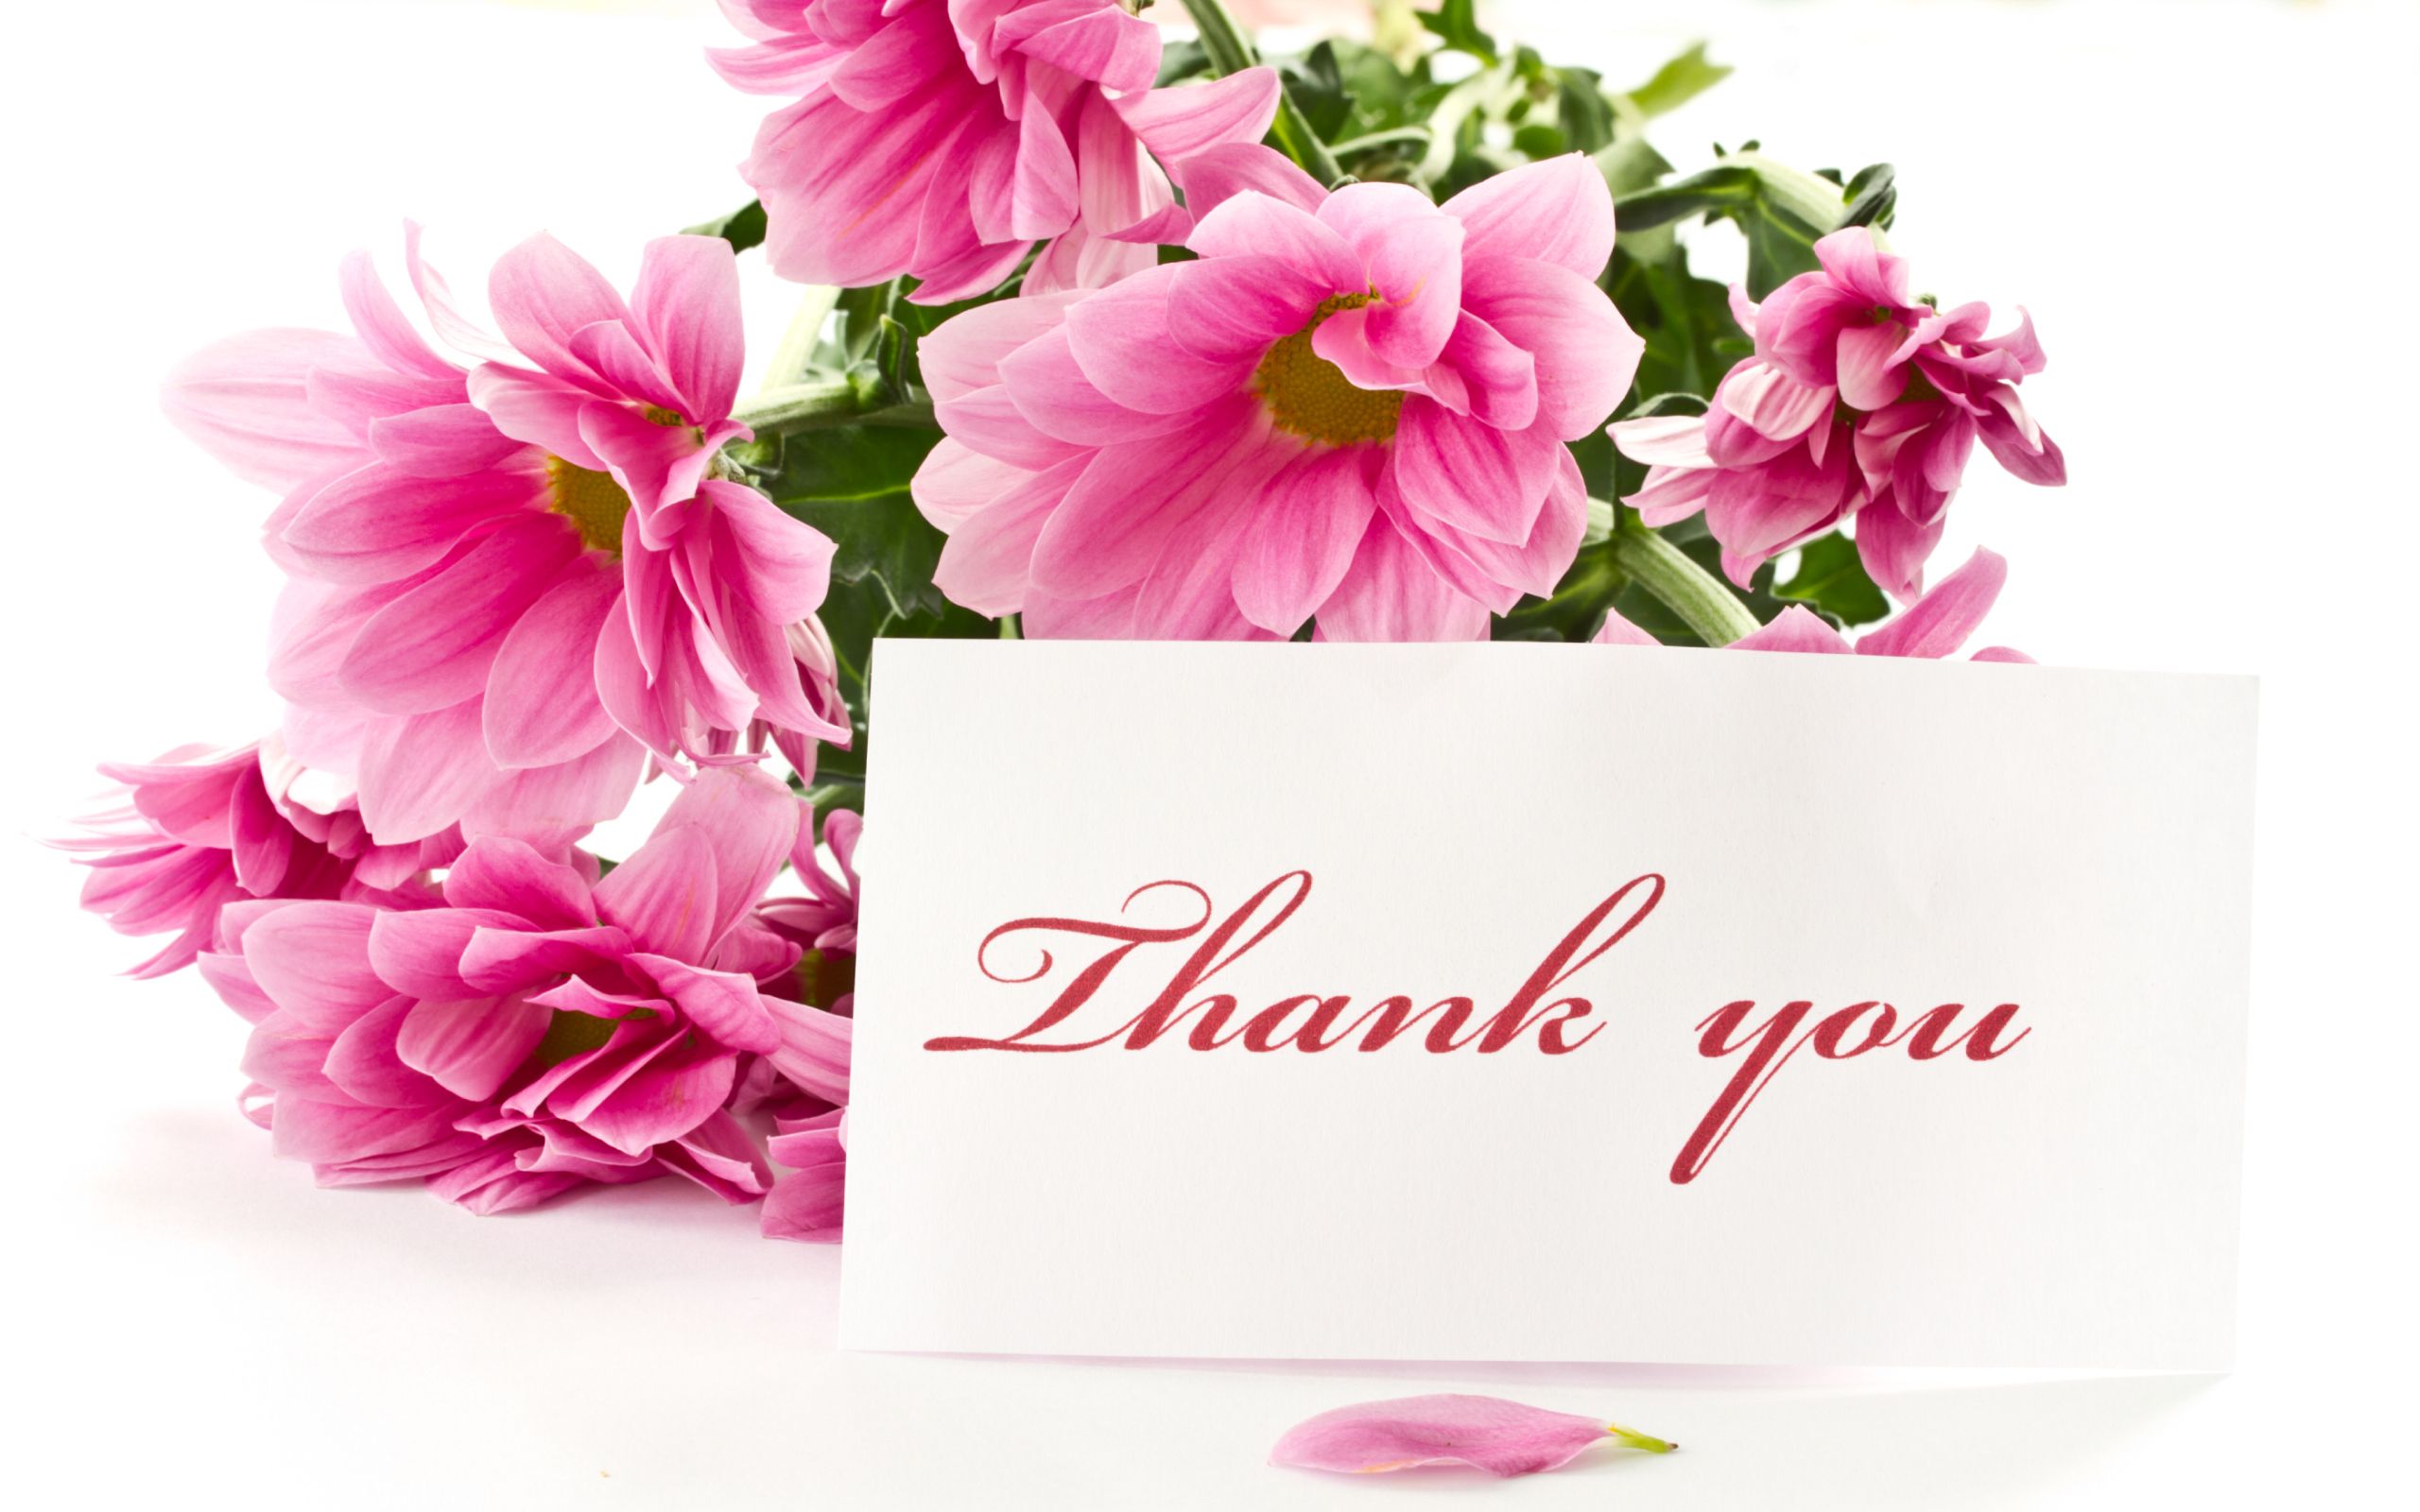 Thank You colorful text hd wallpapers Wallpapers Wide Free